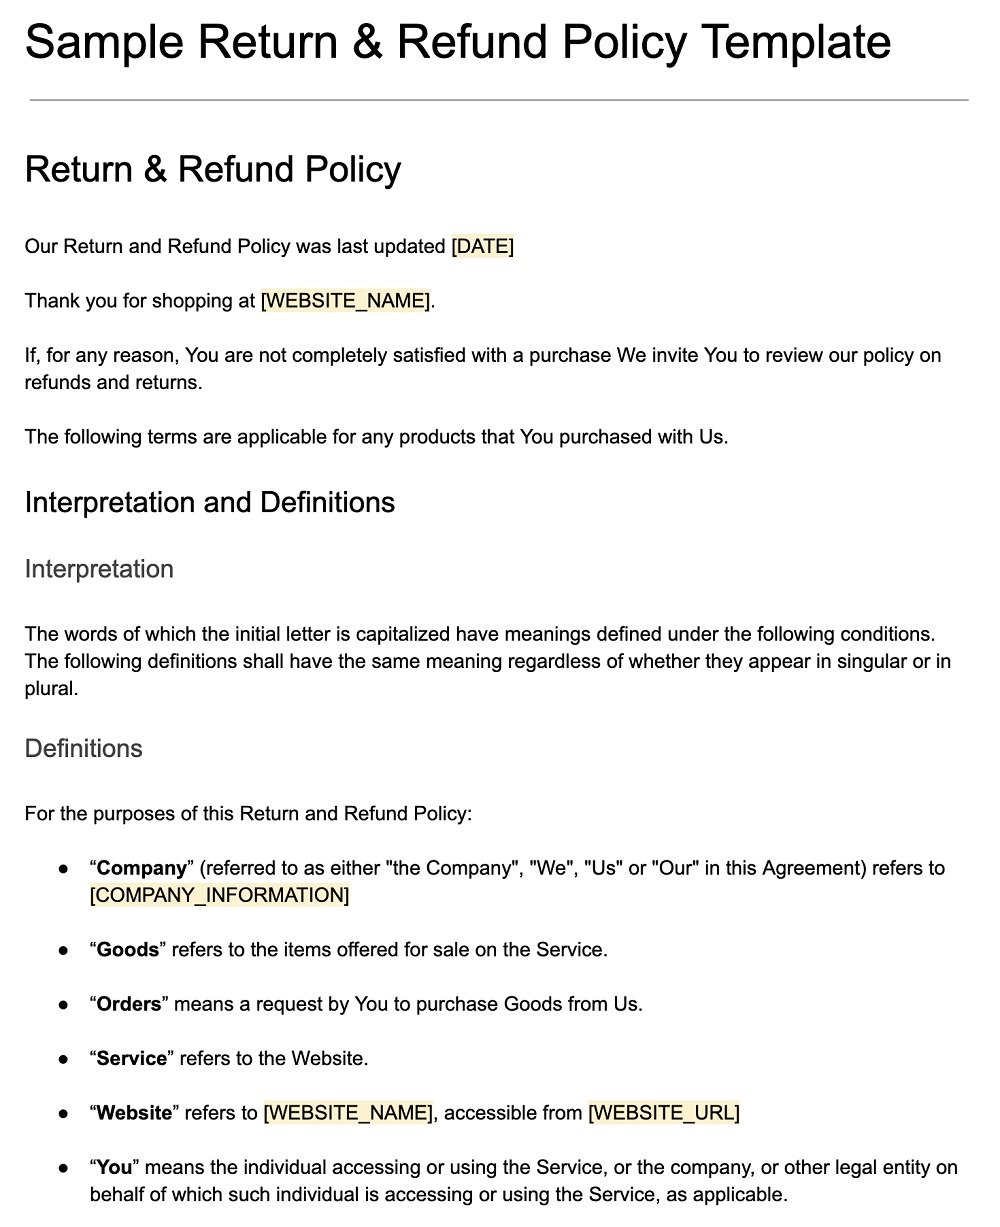 sample-return-policy-for-ecommerce-stores-termsfeed-2022